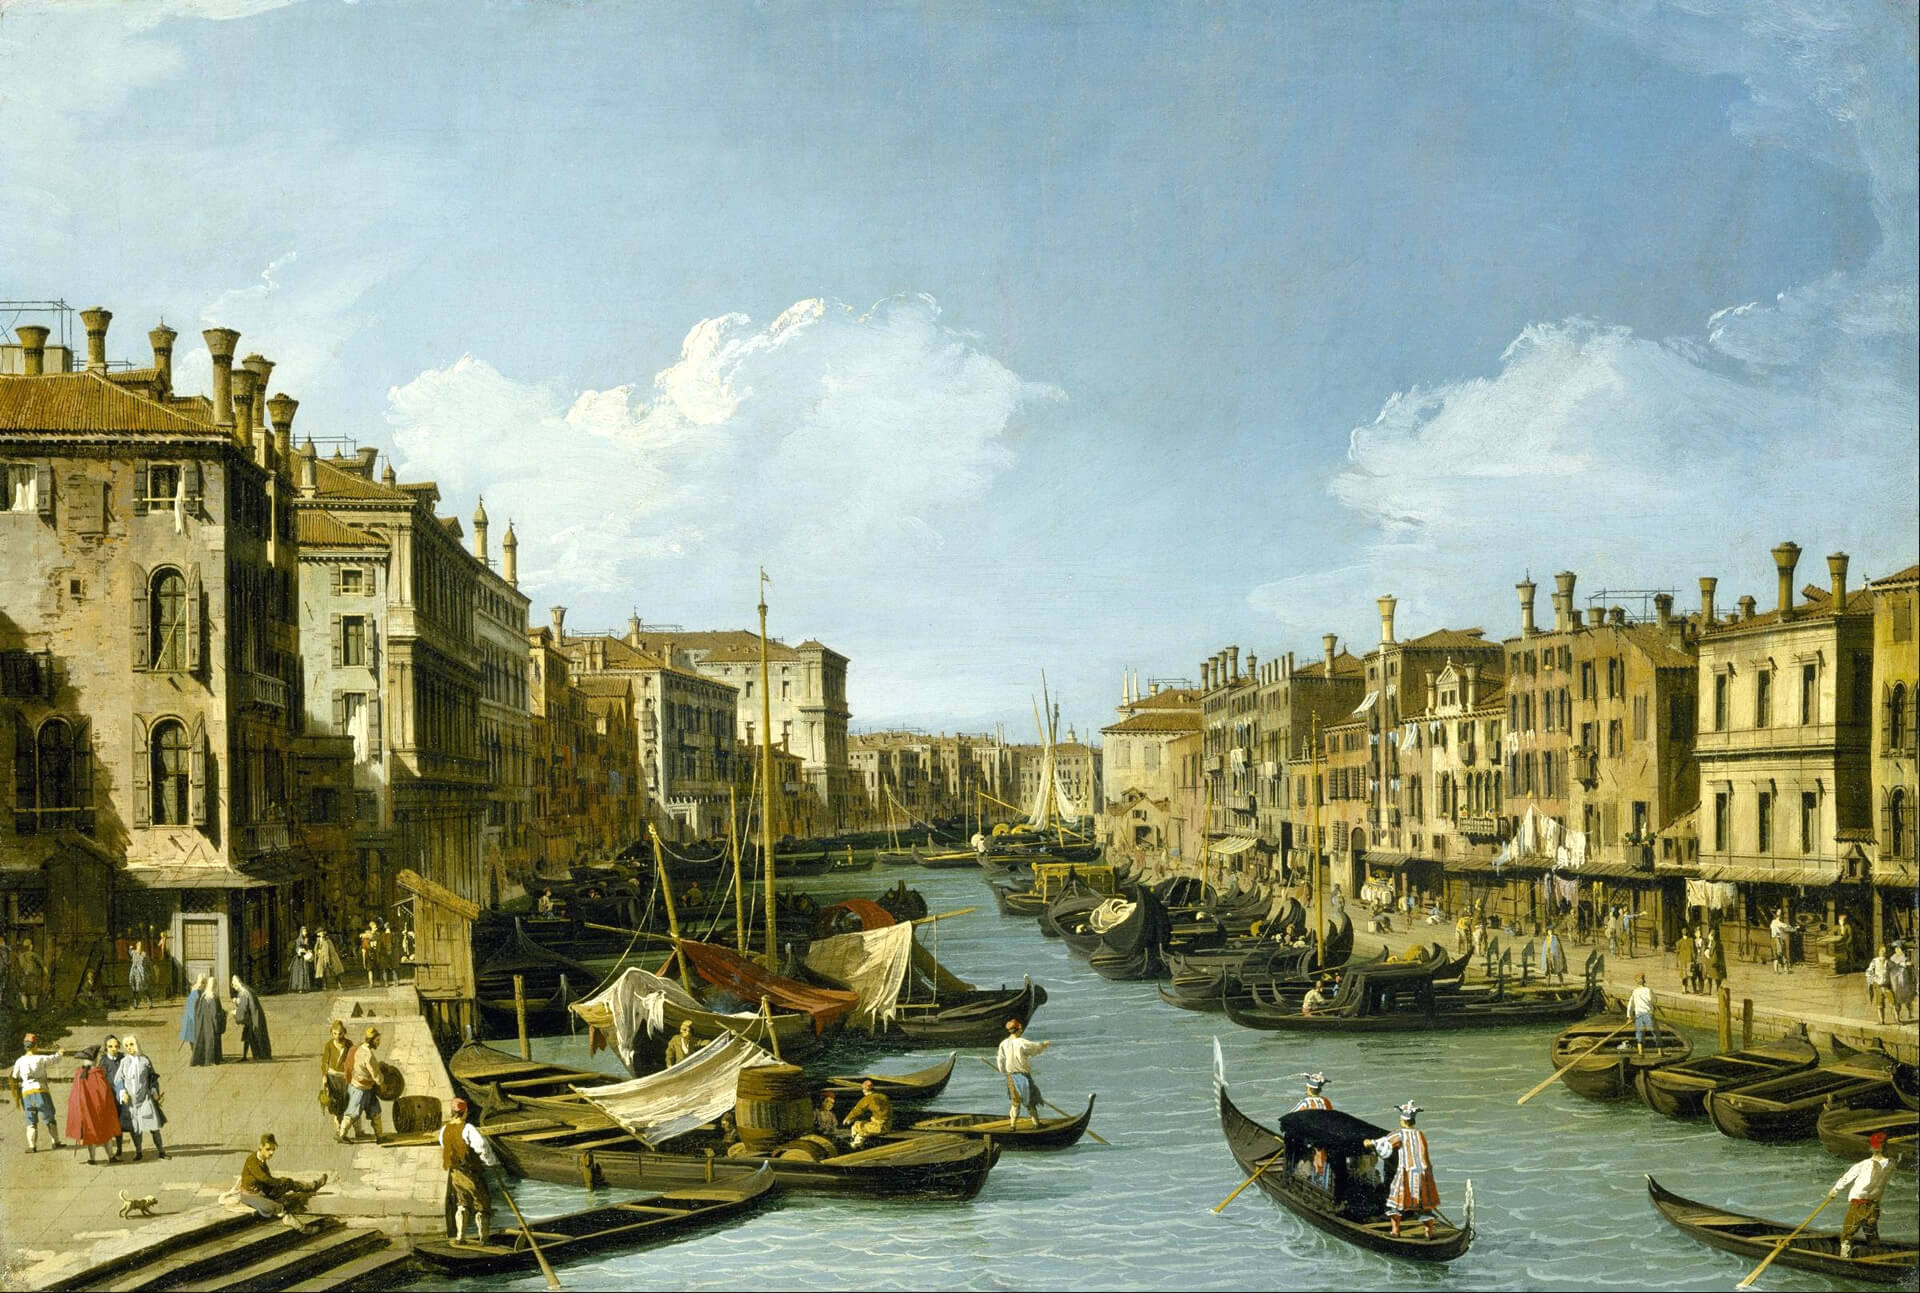 Grand Canal in Venice from Palazzo Flangini in 1738